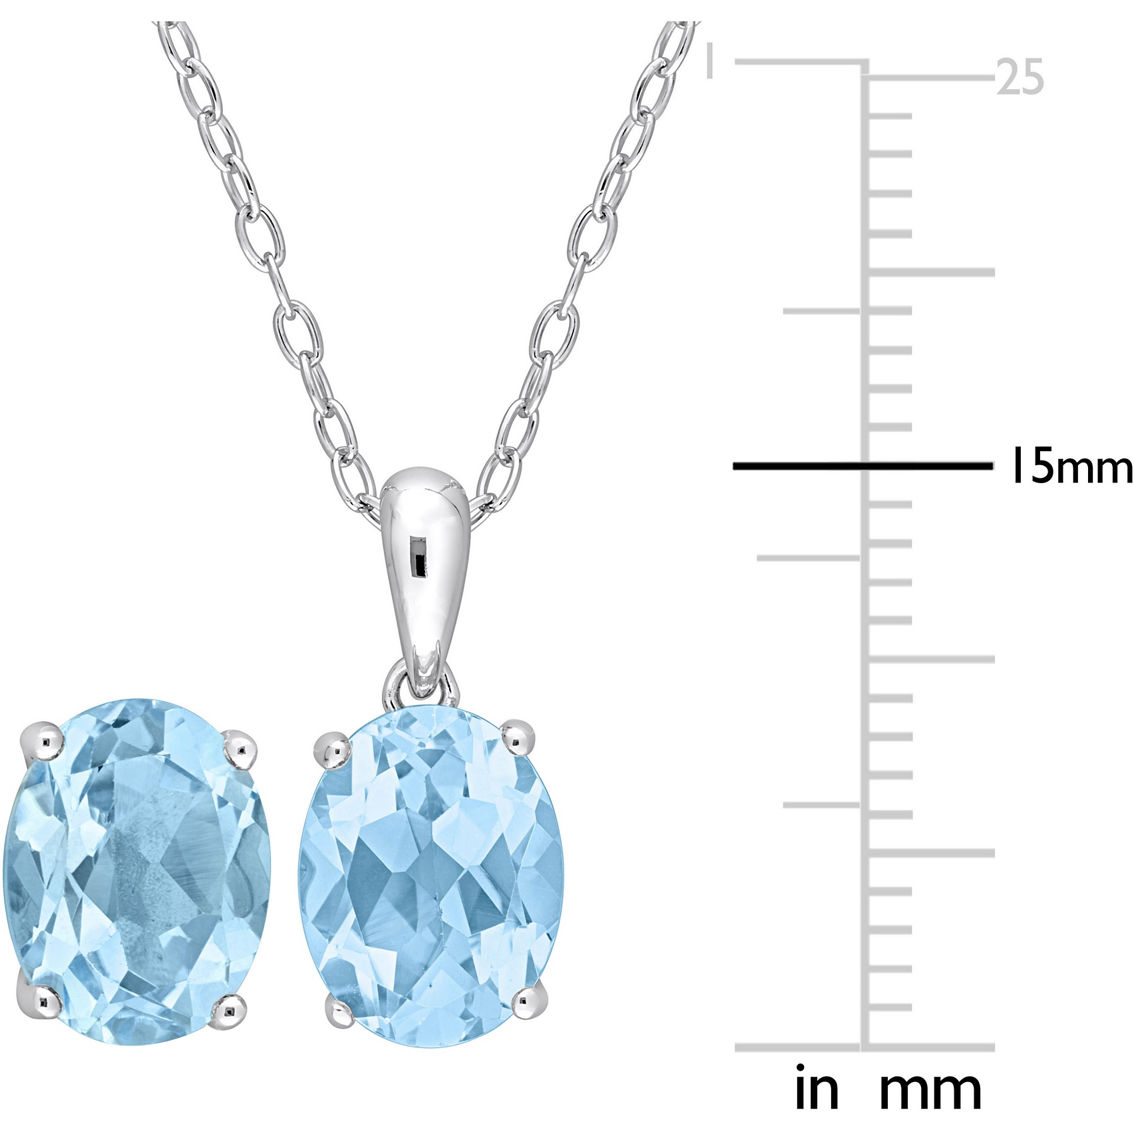 Sofia B. Sterling Silver Oval Blue Topaz Solitaire Necklace and Earrings - Image 4 of 4